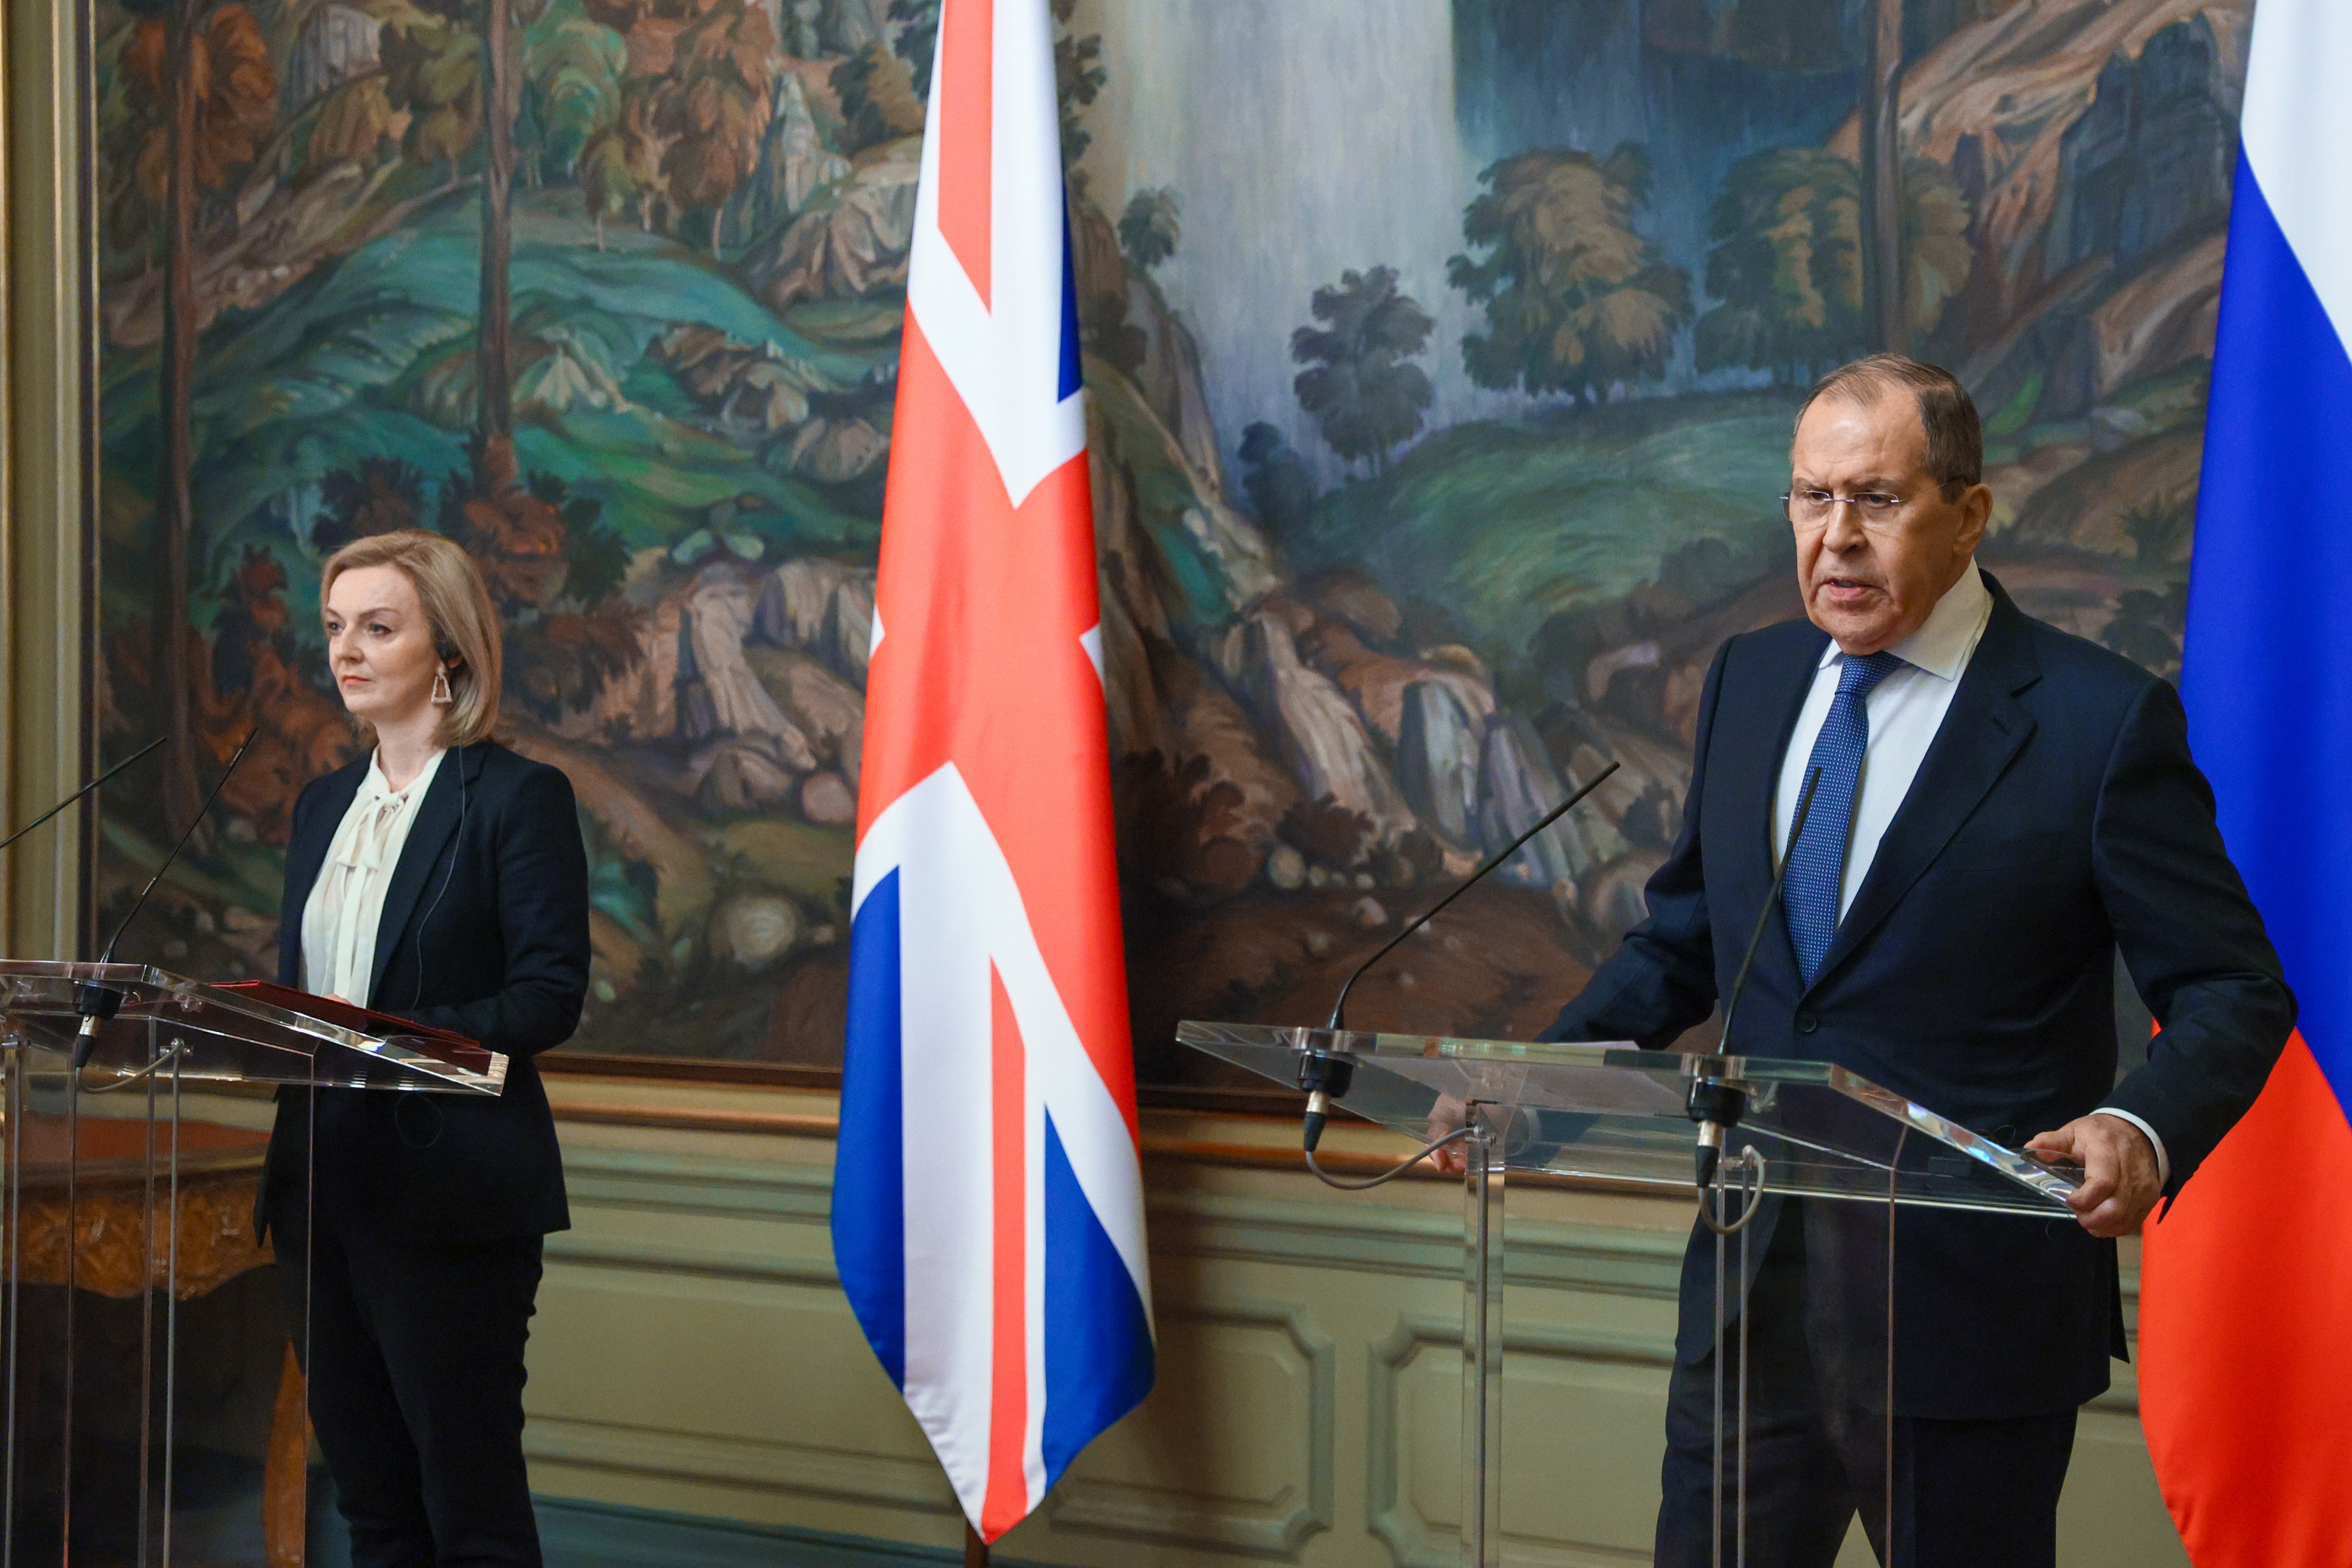 Russian foreign minister Sergei Lavrov and British foreign secretary Liz Truss during their joint news conference